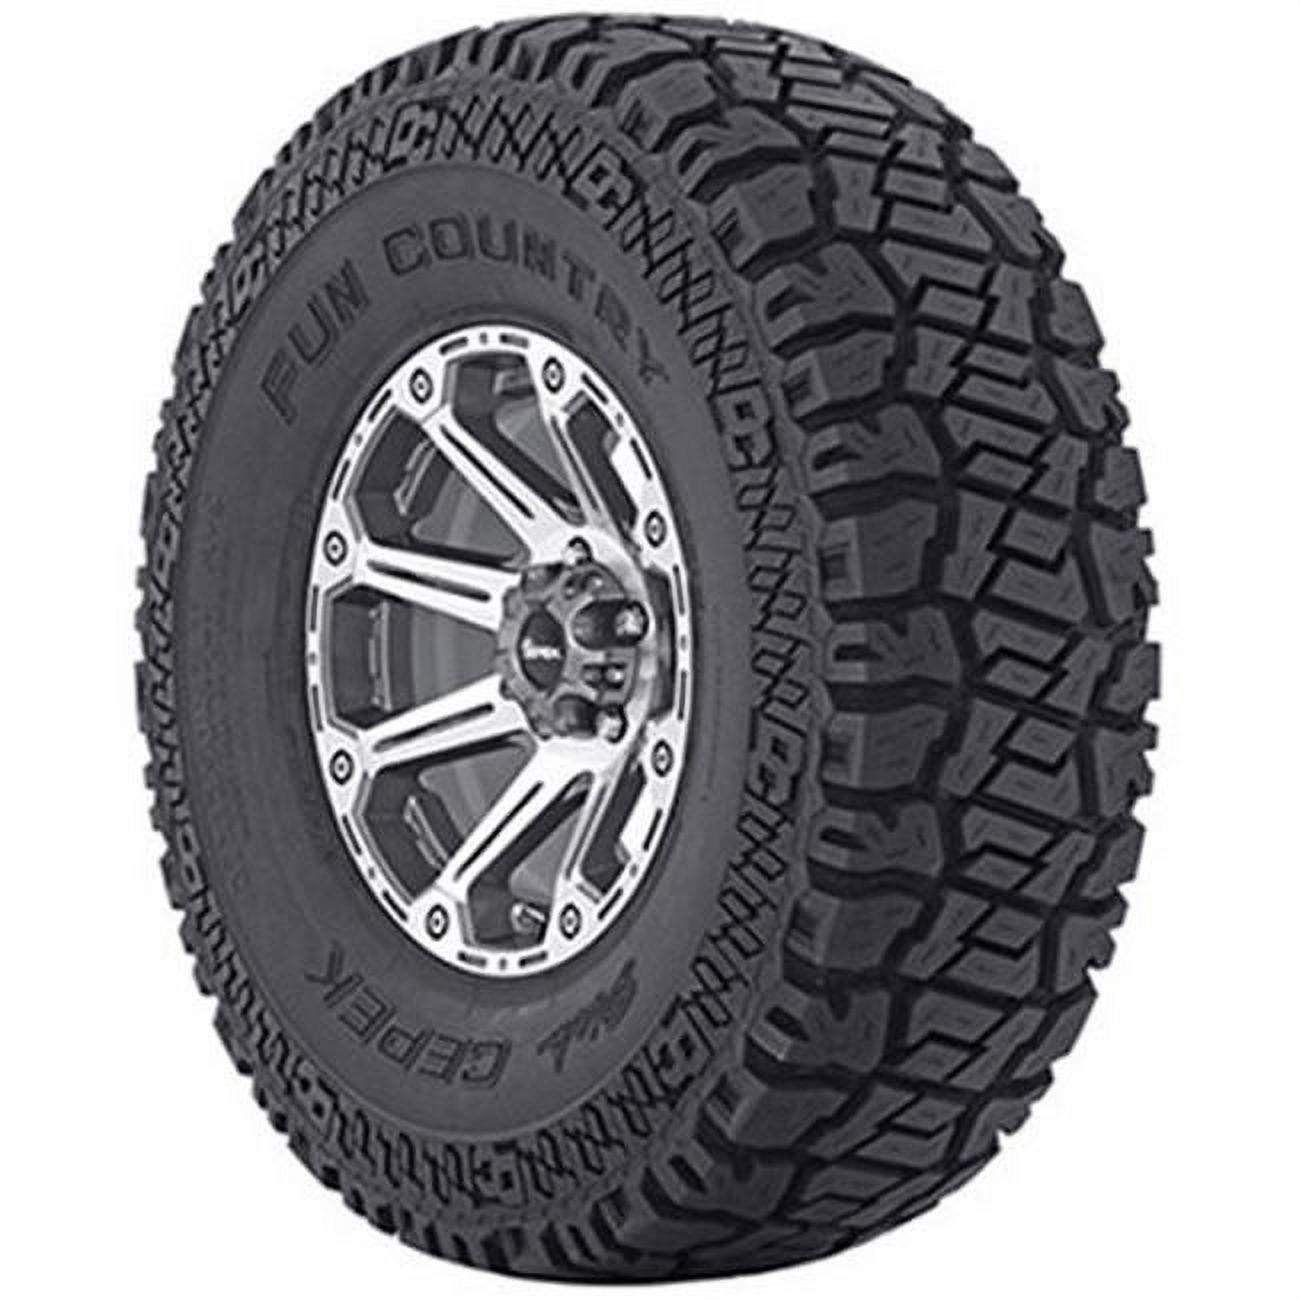 Mickey Thompson 90000000690 Dick Cepek Radial Mud Country Tire LT305/60R18 - image 1 of 2